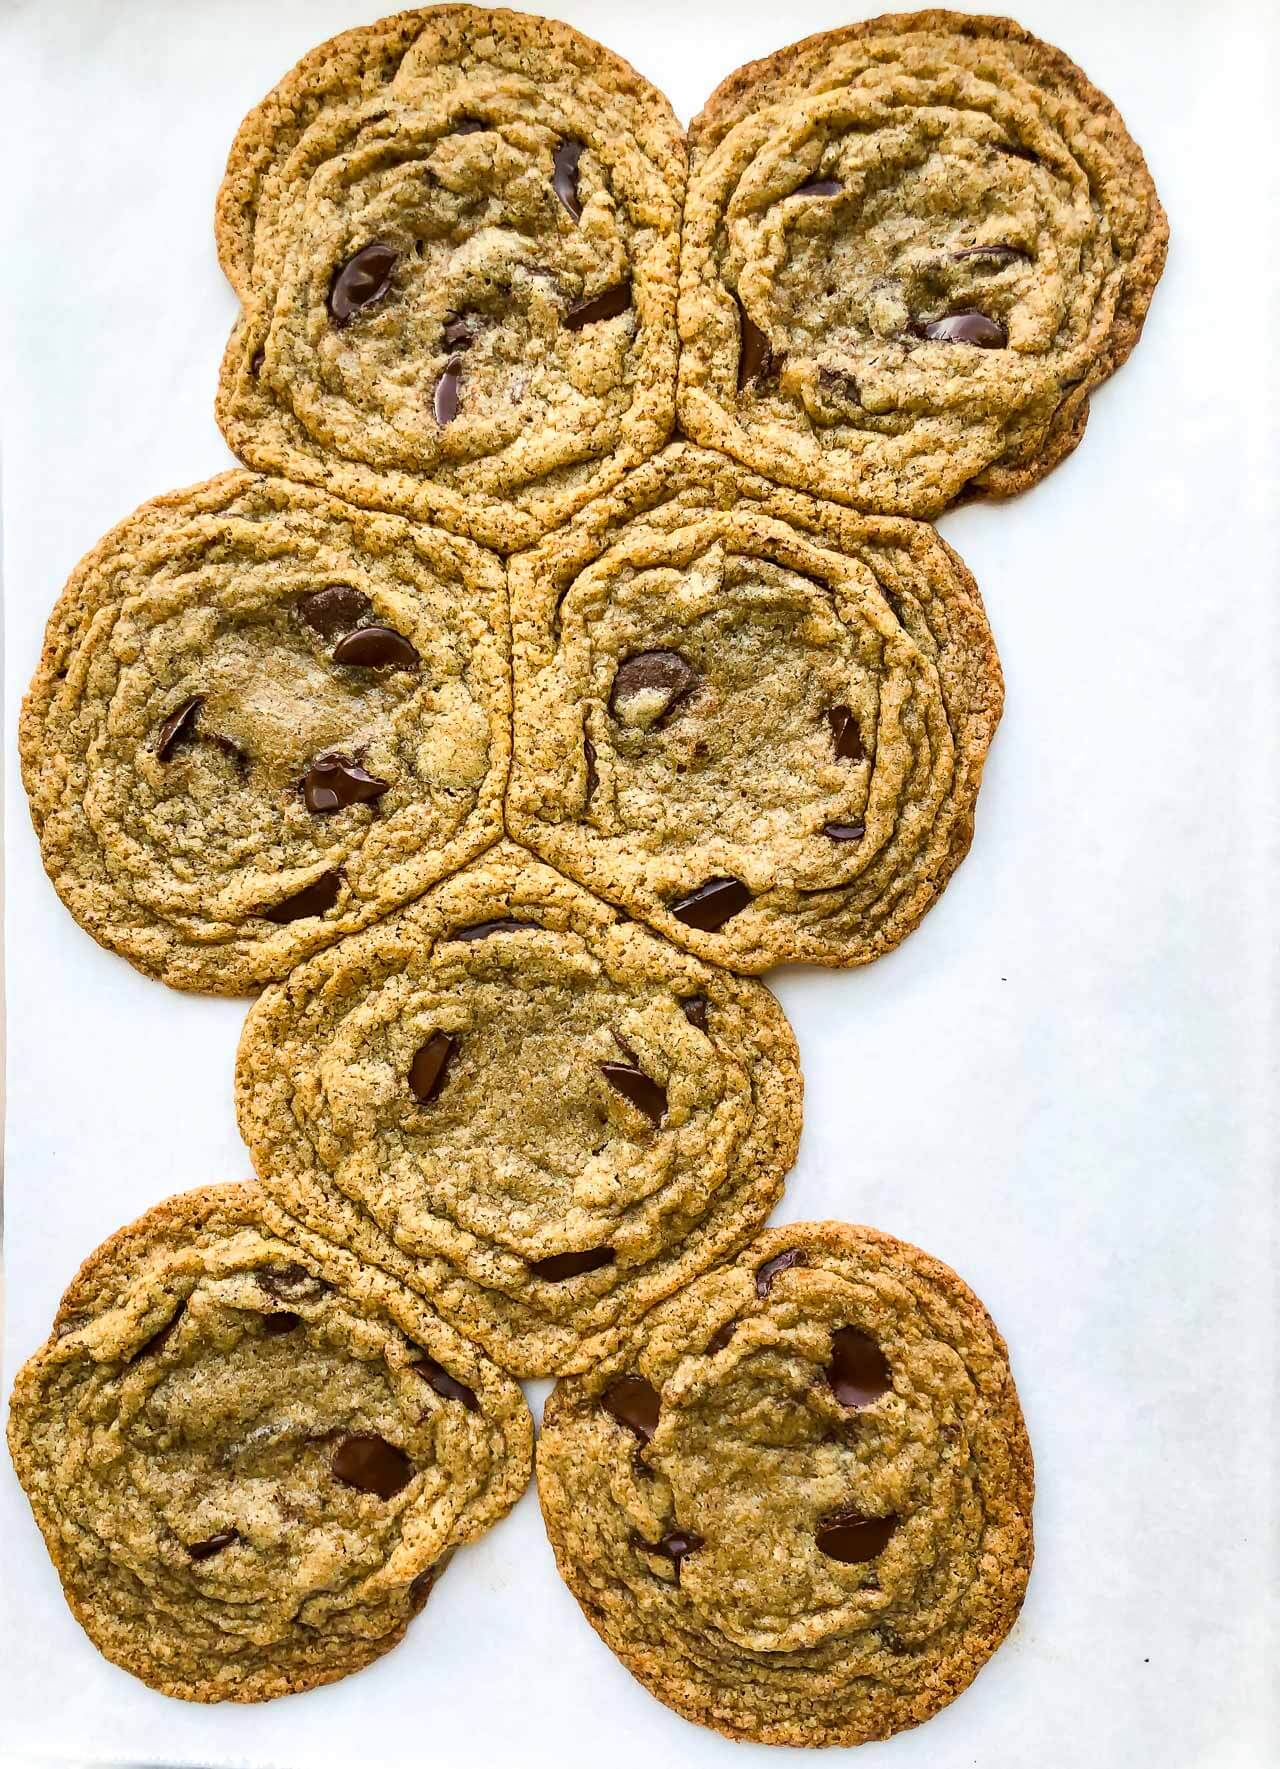 Image to show chocolate chip cookies made with 100 % buckwheat flour spread out as they bake and merge into one big cookie